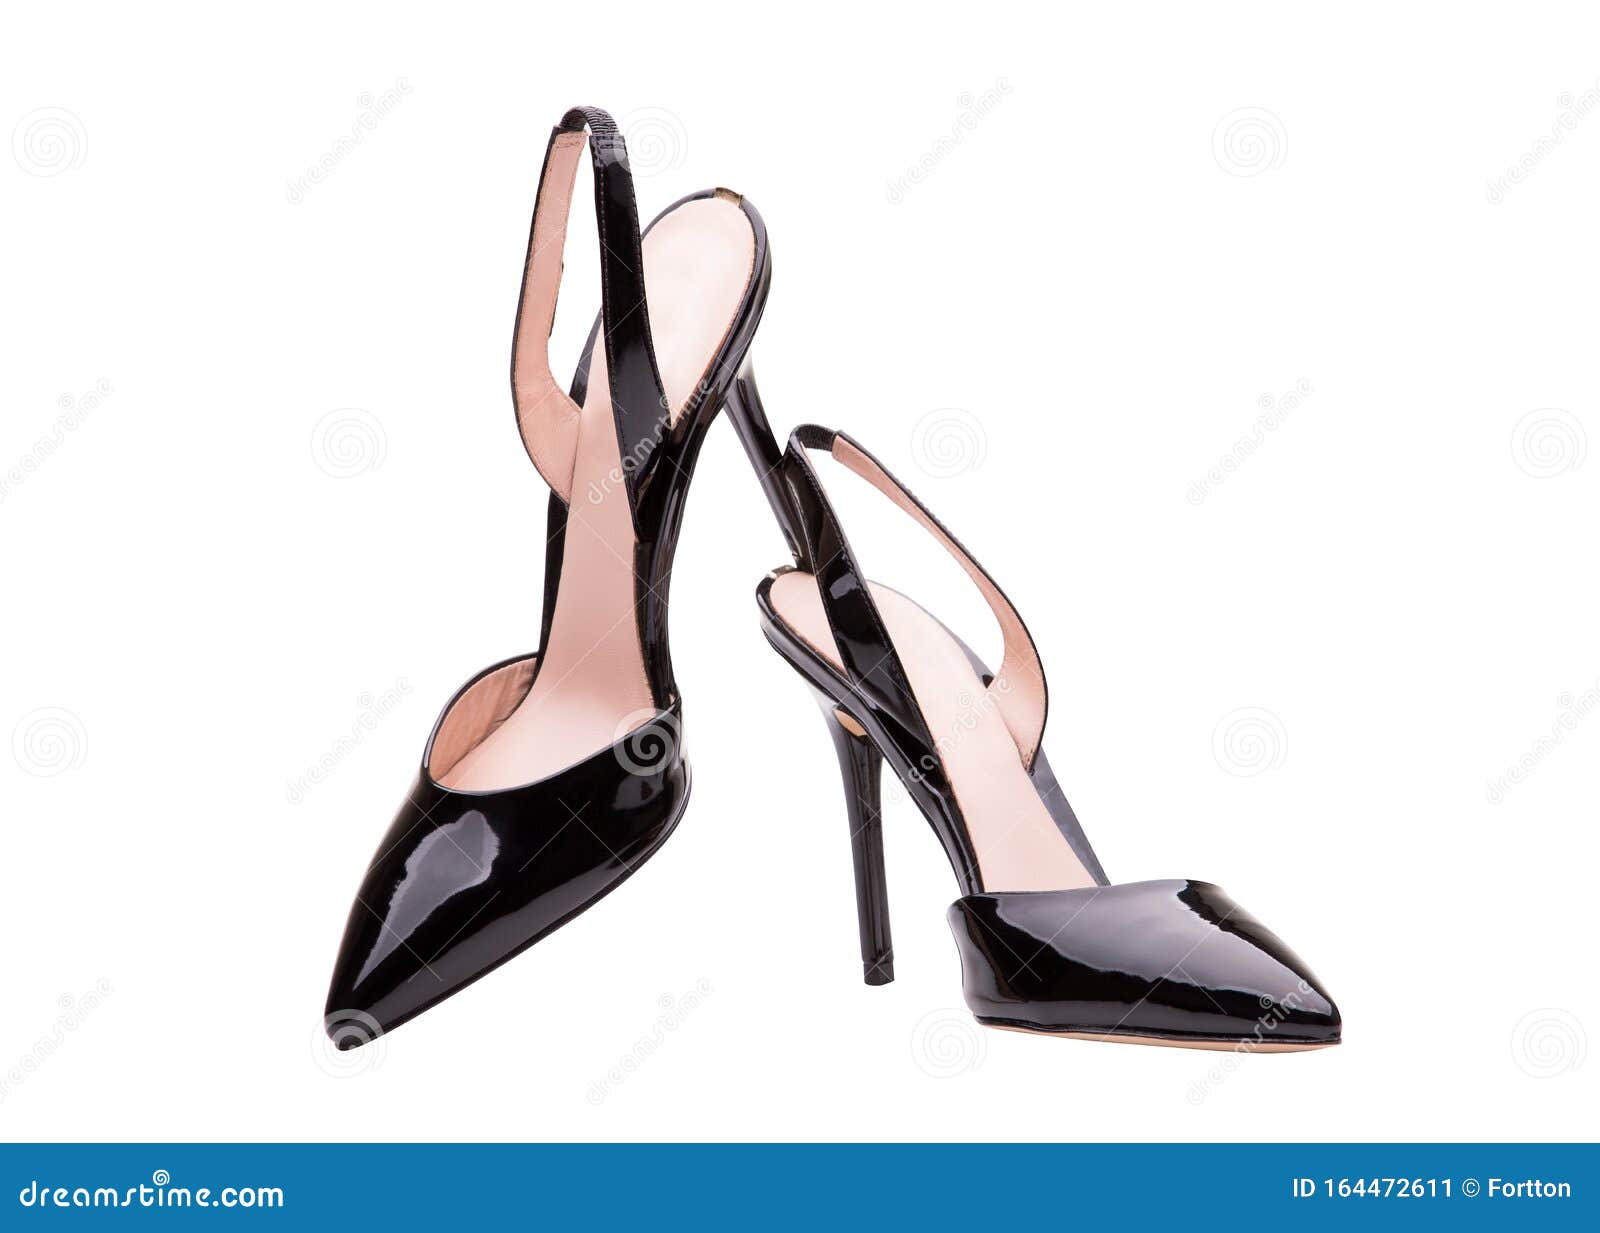 Narrow-toe Patent Leather Shoes Stock Image - Image of footwear, foot:  164472611